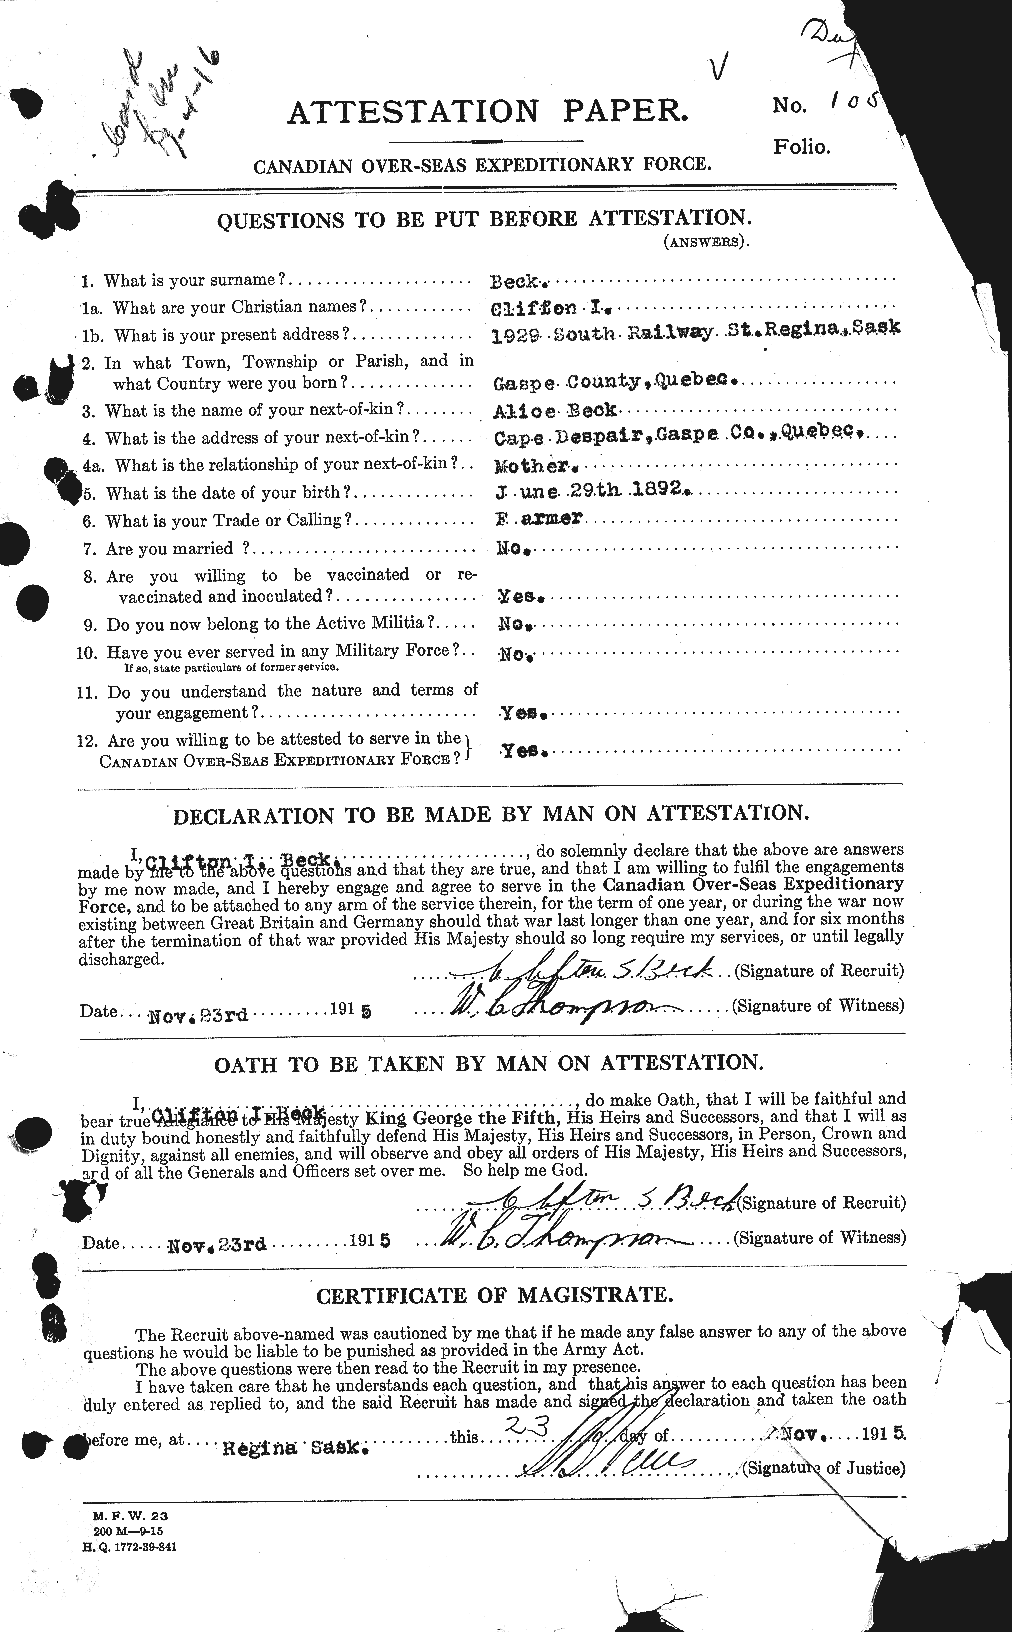 Personnel Records of the First World War - CEF 232100a